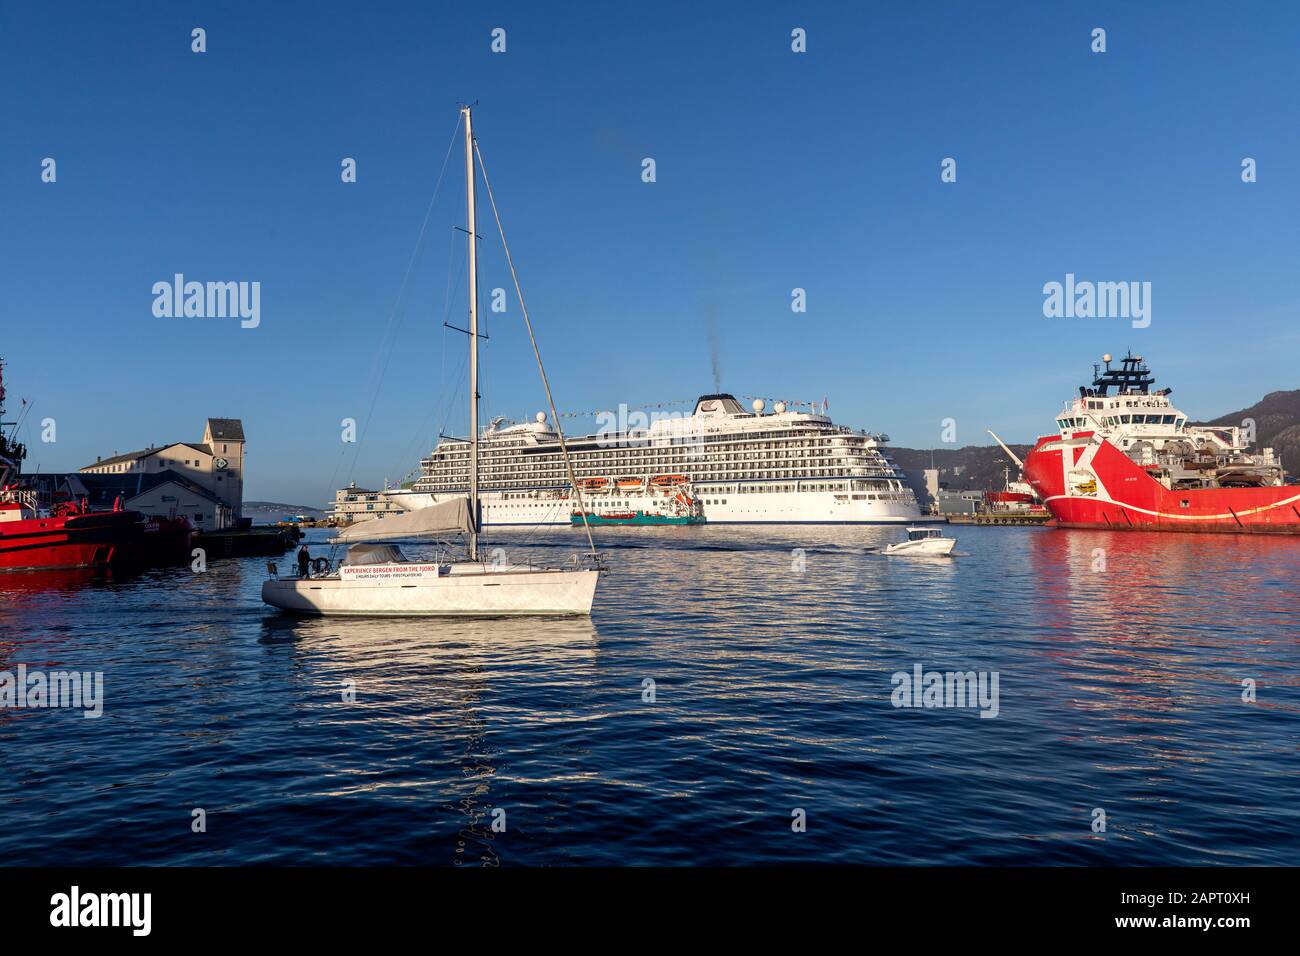 Sailboat First Player. In background, cruise ship Viking Star at Skolten quay in port of Bergen, Norway. Tanker vessel Oslo Tank alongside the large c Stock Photo